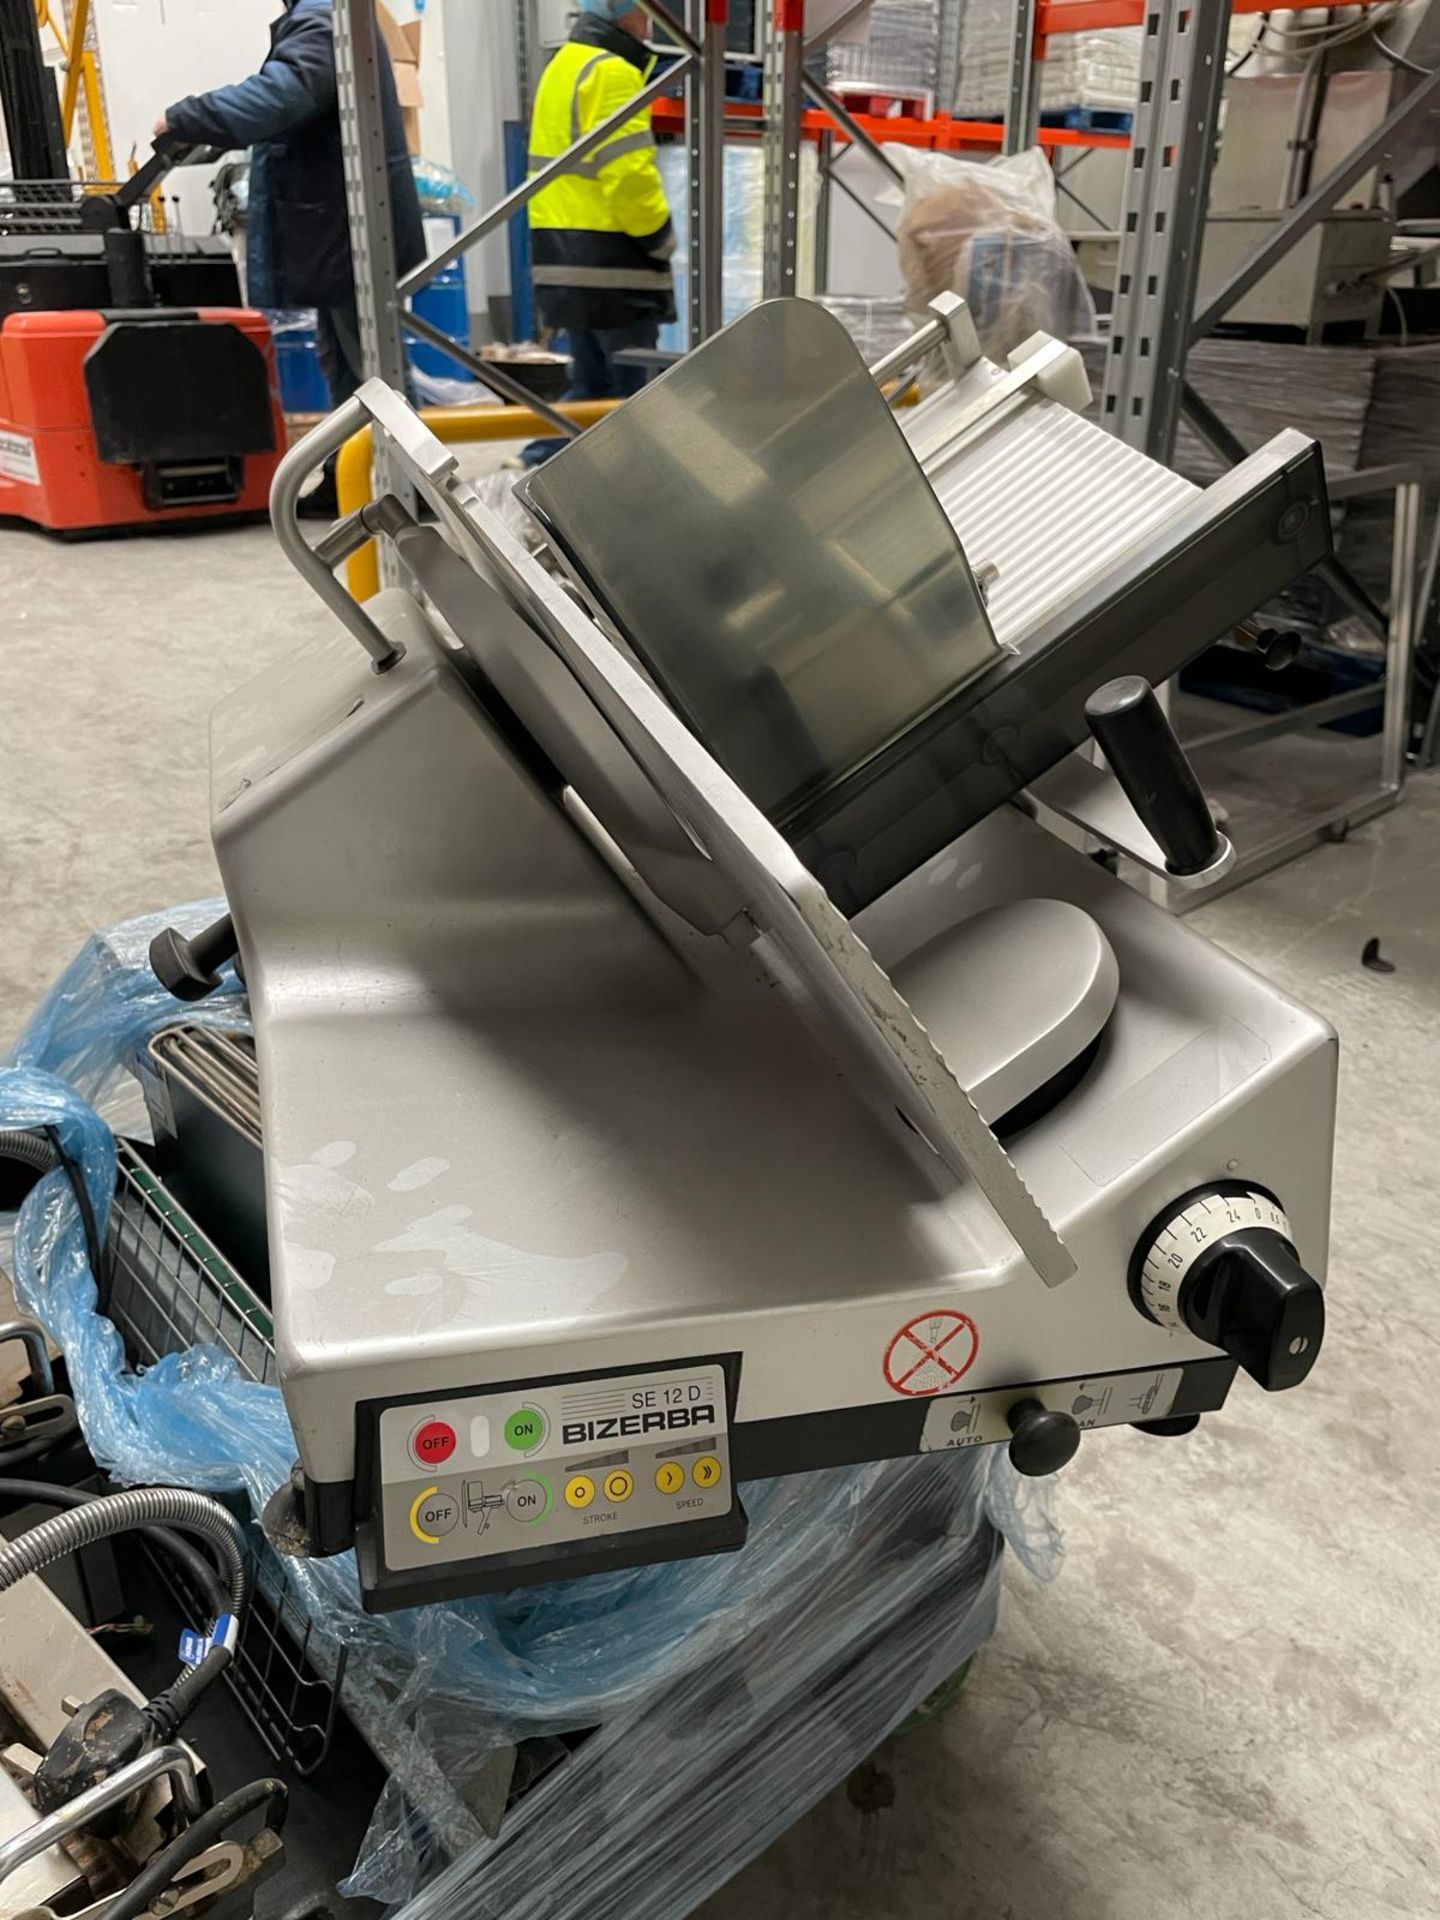 Bizerba SE 12D Meat slicer. Please note this lot is located at Unit 29, Ridge Way, Iver, Bucks, - Image 10 of 11